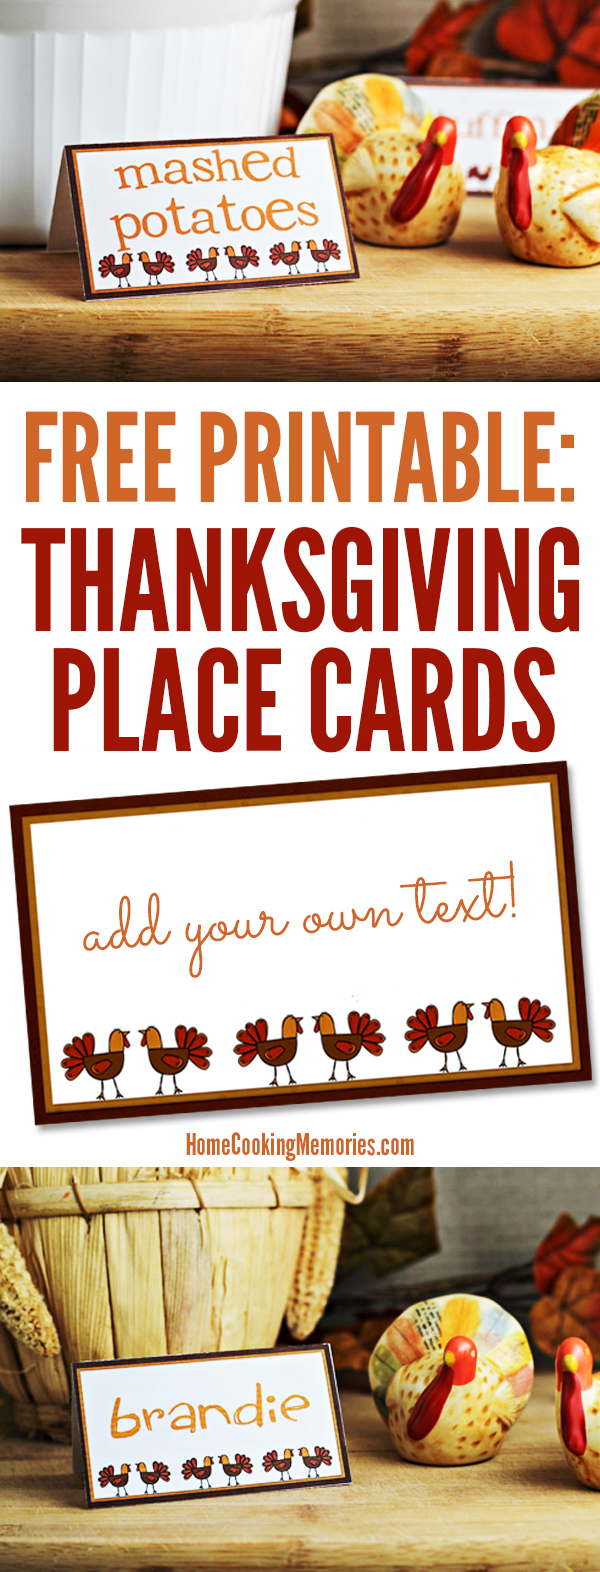 free-printables-thanksgiving-place-cards-home-cooking-memories